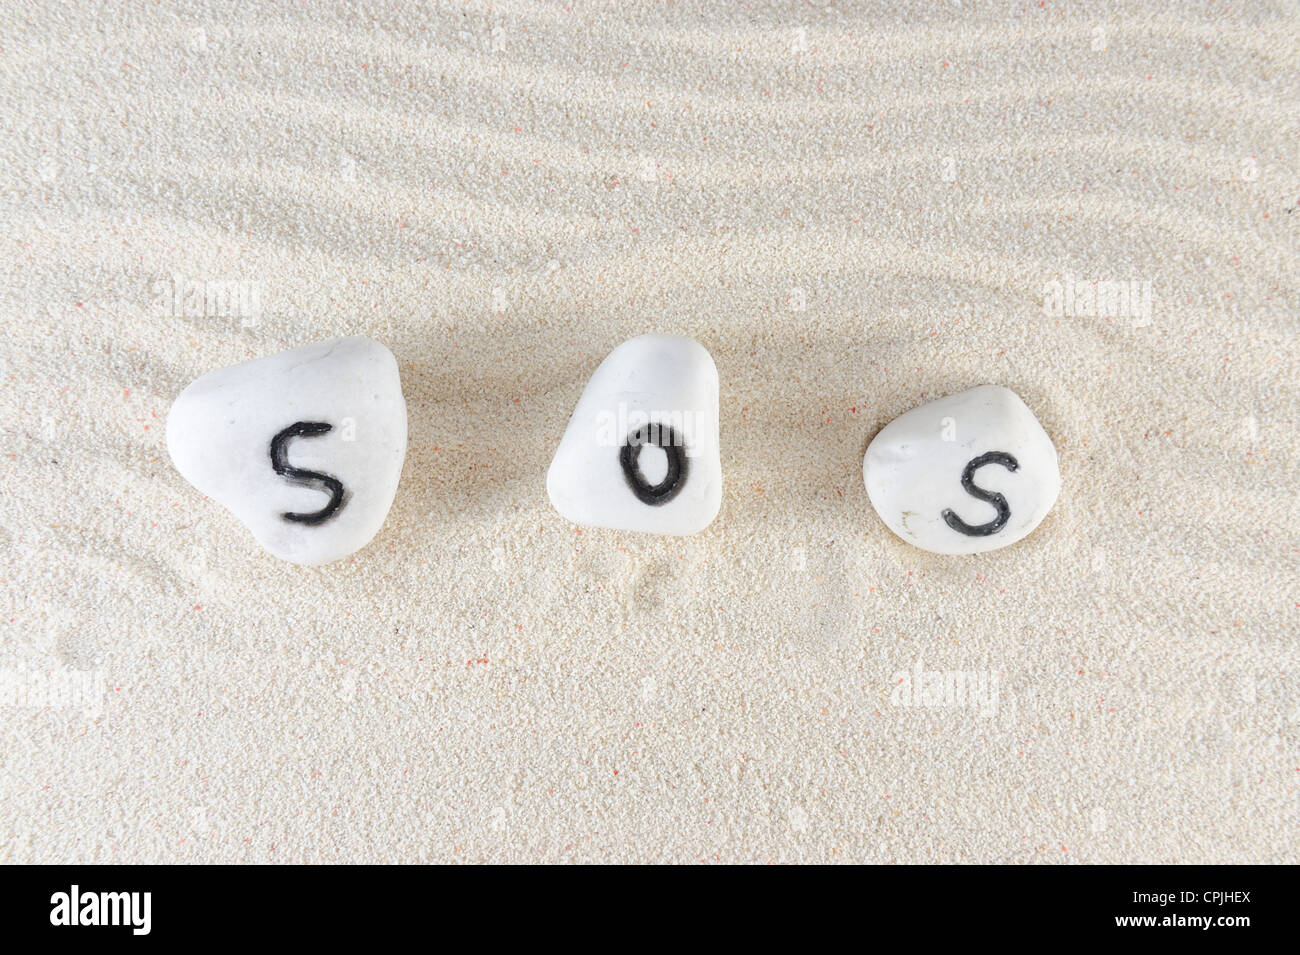 SOS word on group of stones with sand background Stock Photo